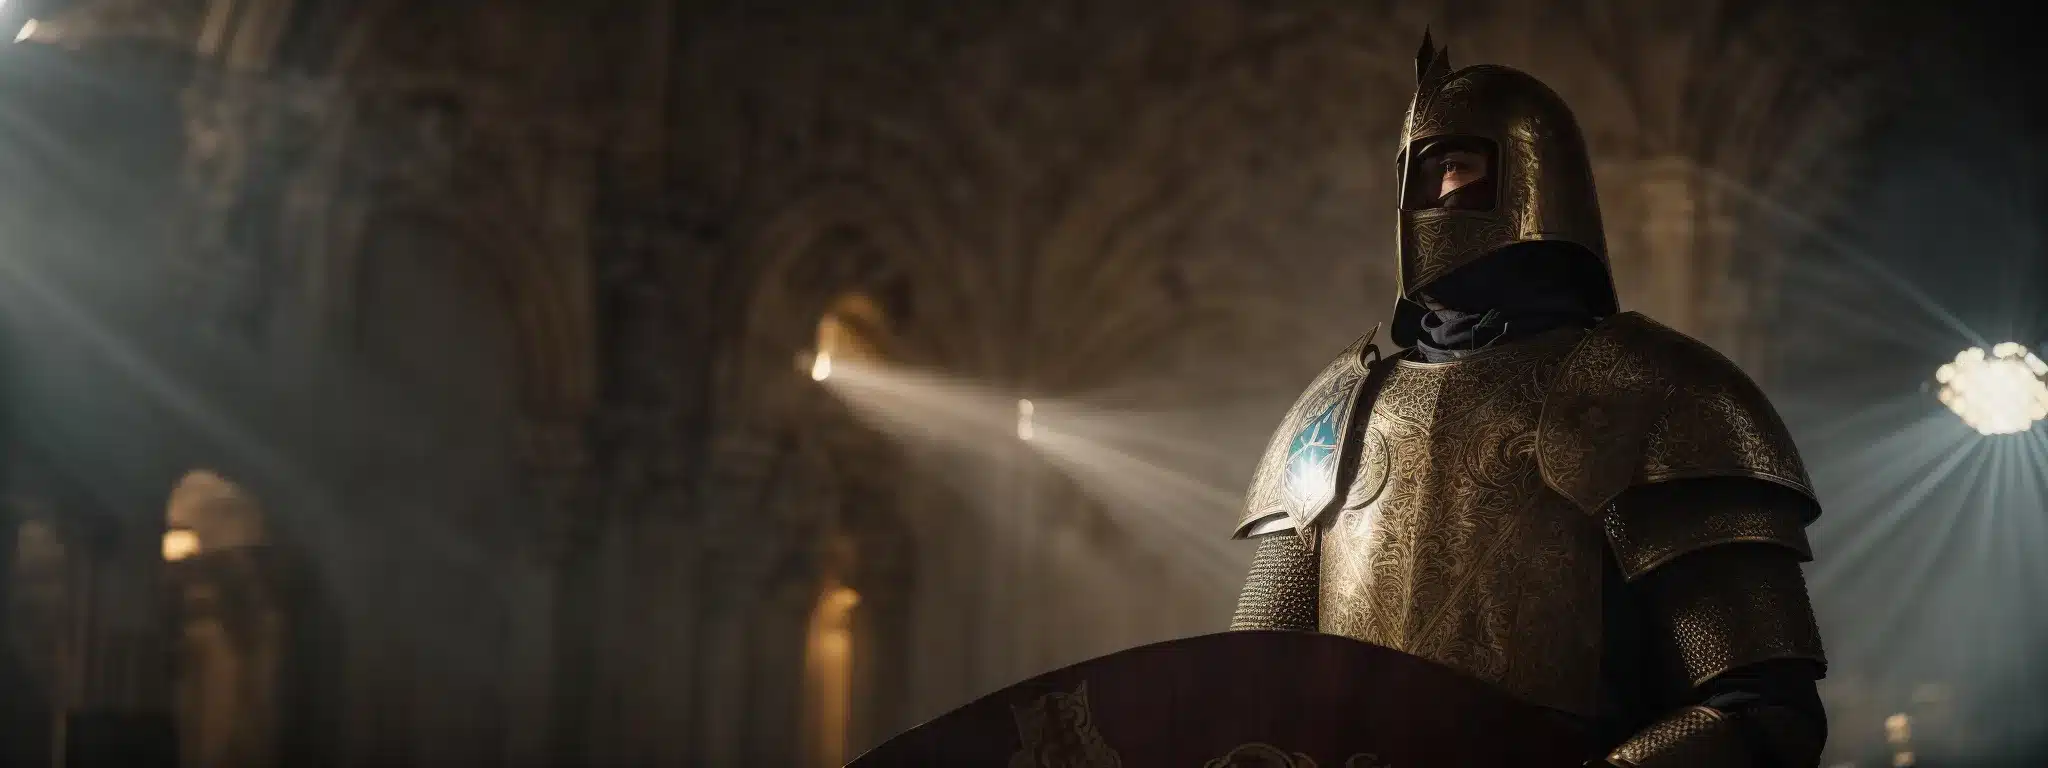 A Knight In Resplendent Armor Holding Up A Shield Emblazoned With Unique Symbols, Standing Under A Focused Beam Of Light.